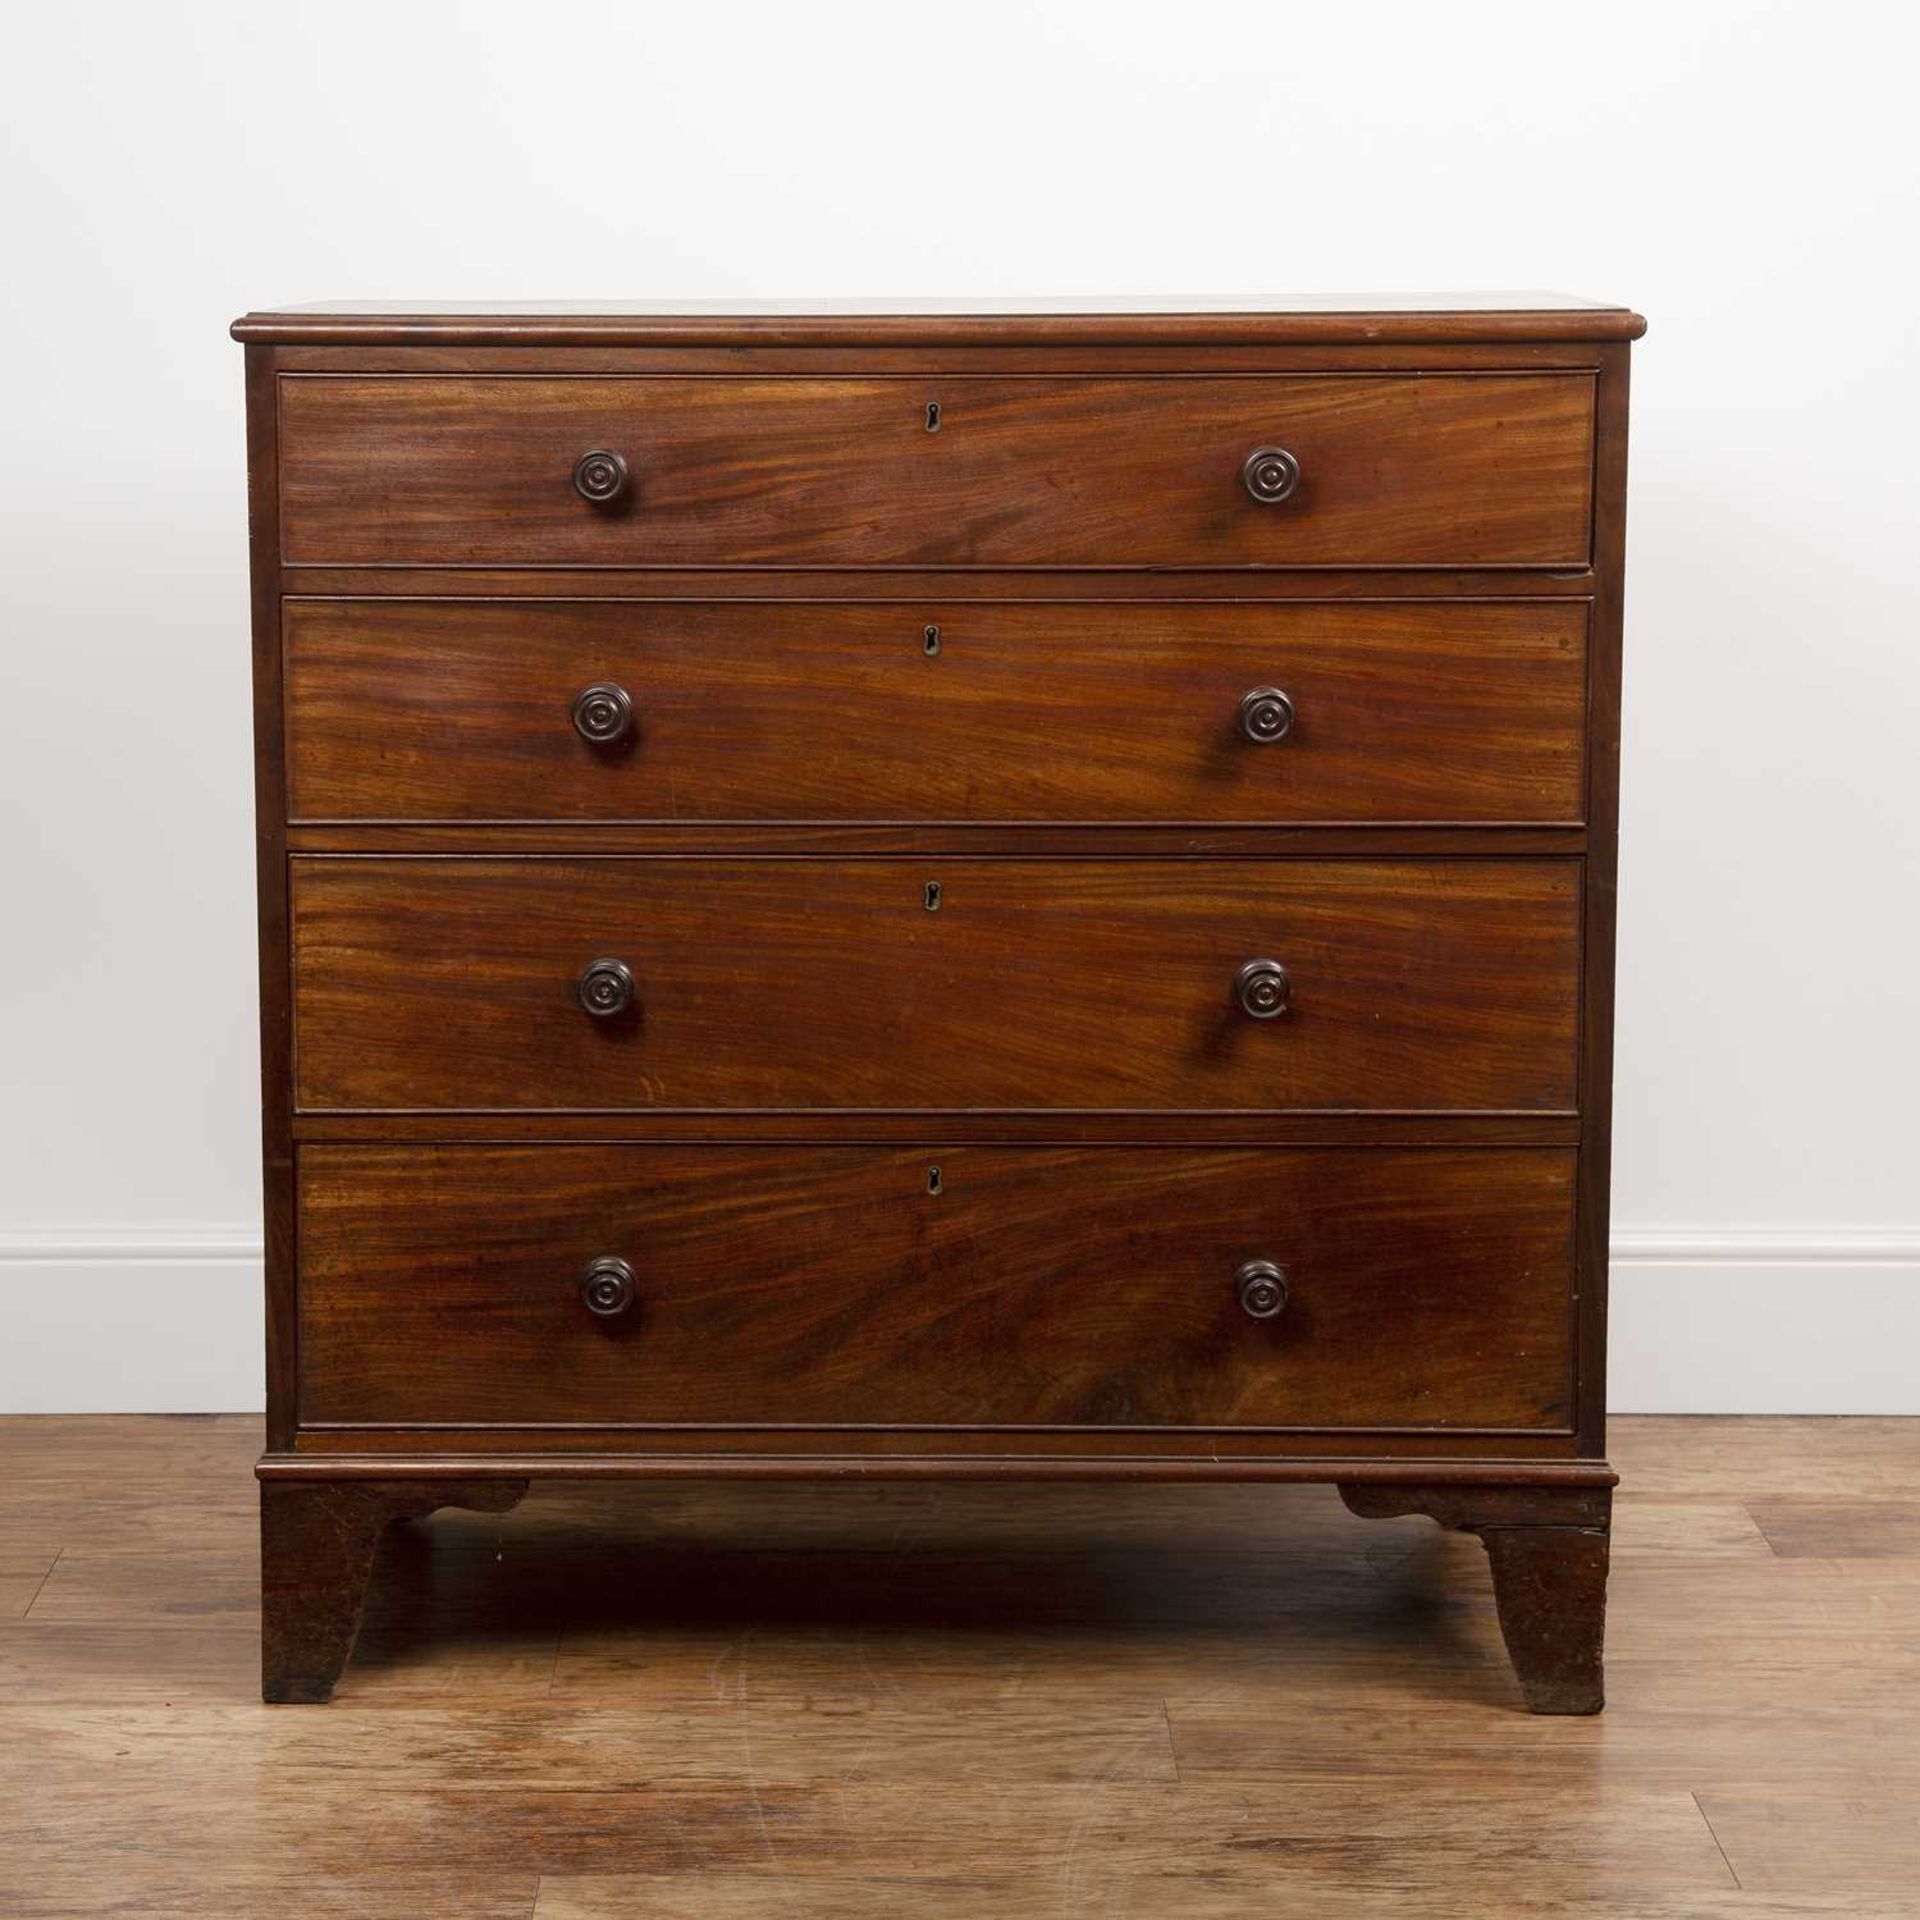 Mahogany Gillows style chest of four graduated drawers 19th Century, with turned handles and brass